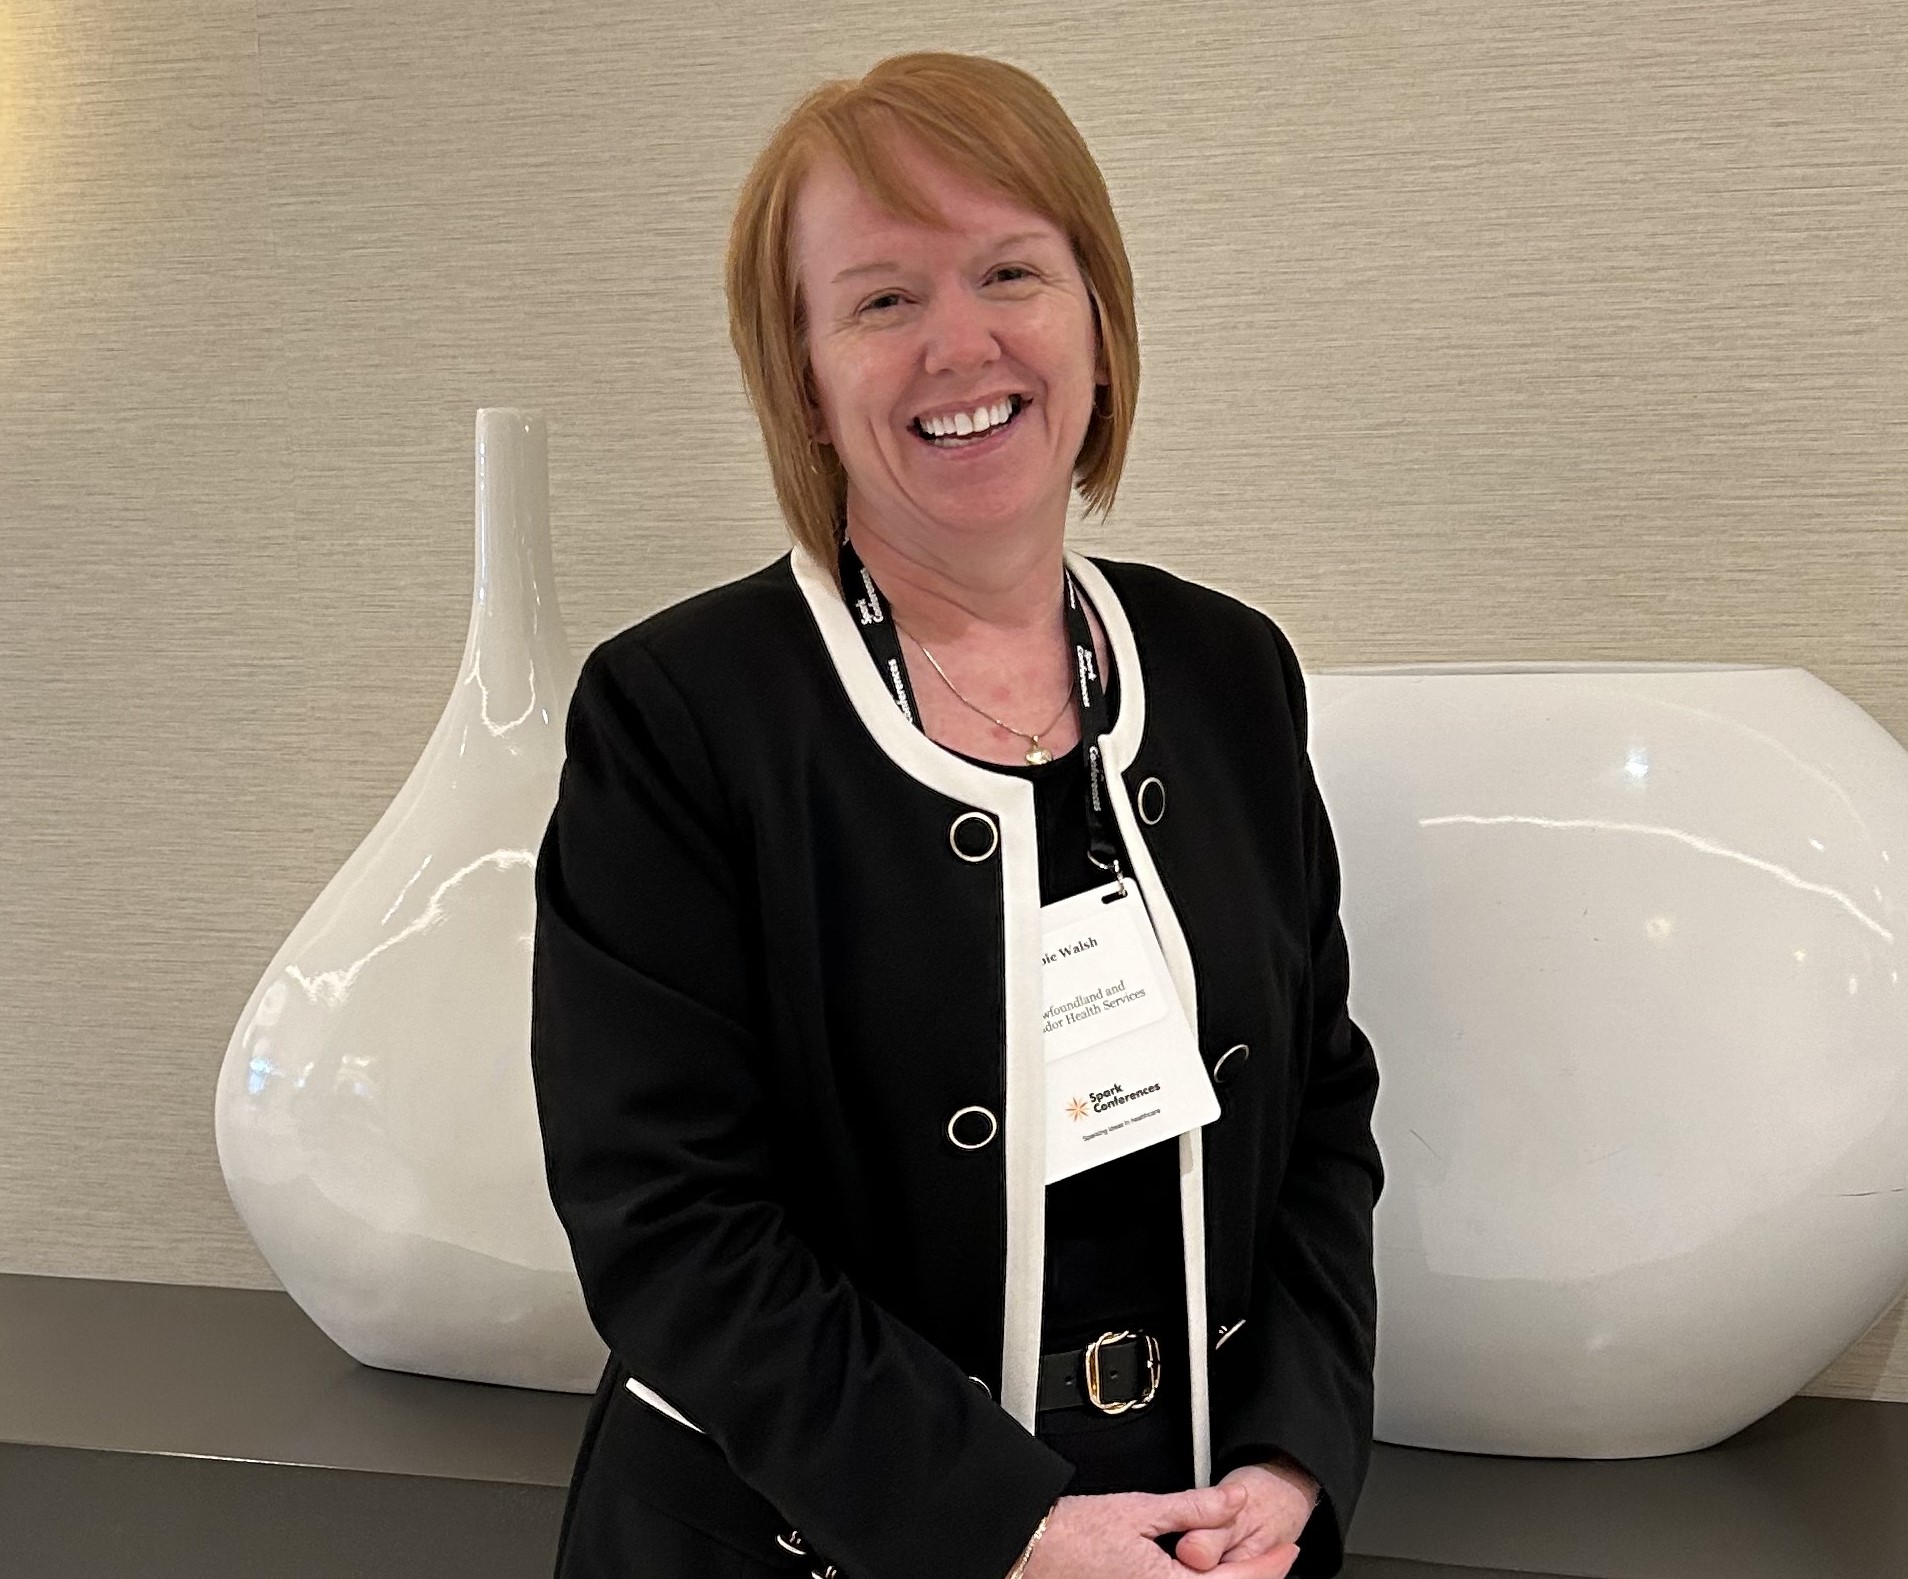 Debbie Walsh at the conference smiling for photo with decorative, white vases behind her